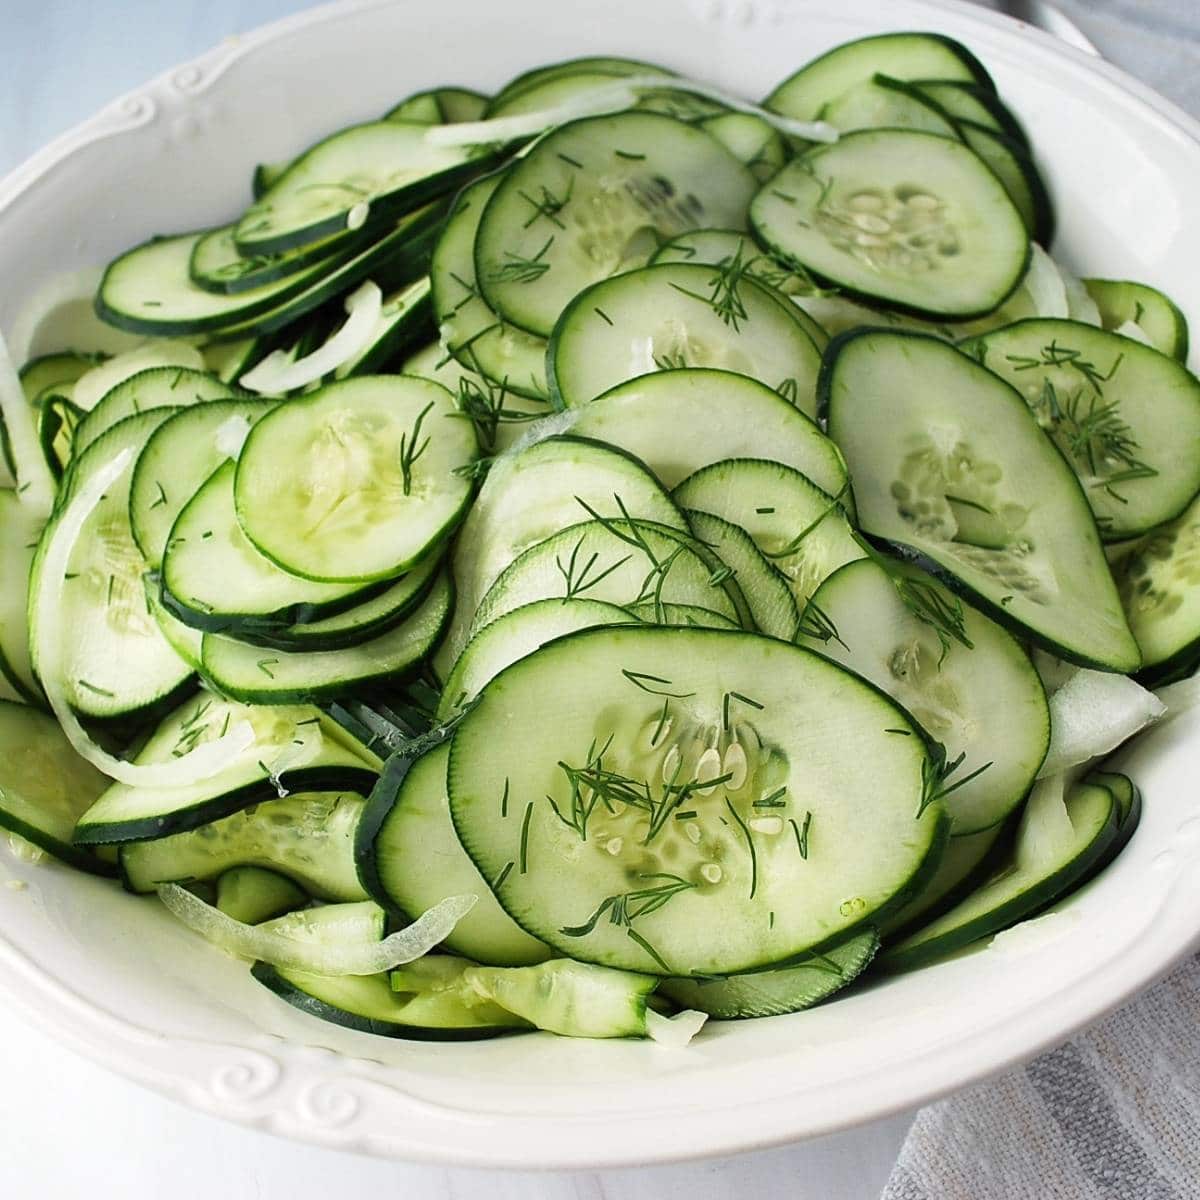 The Easiest Way to Make Cucumbers Taste So Much Better